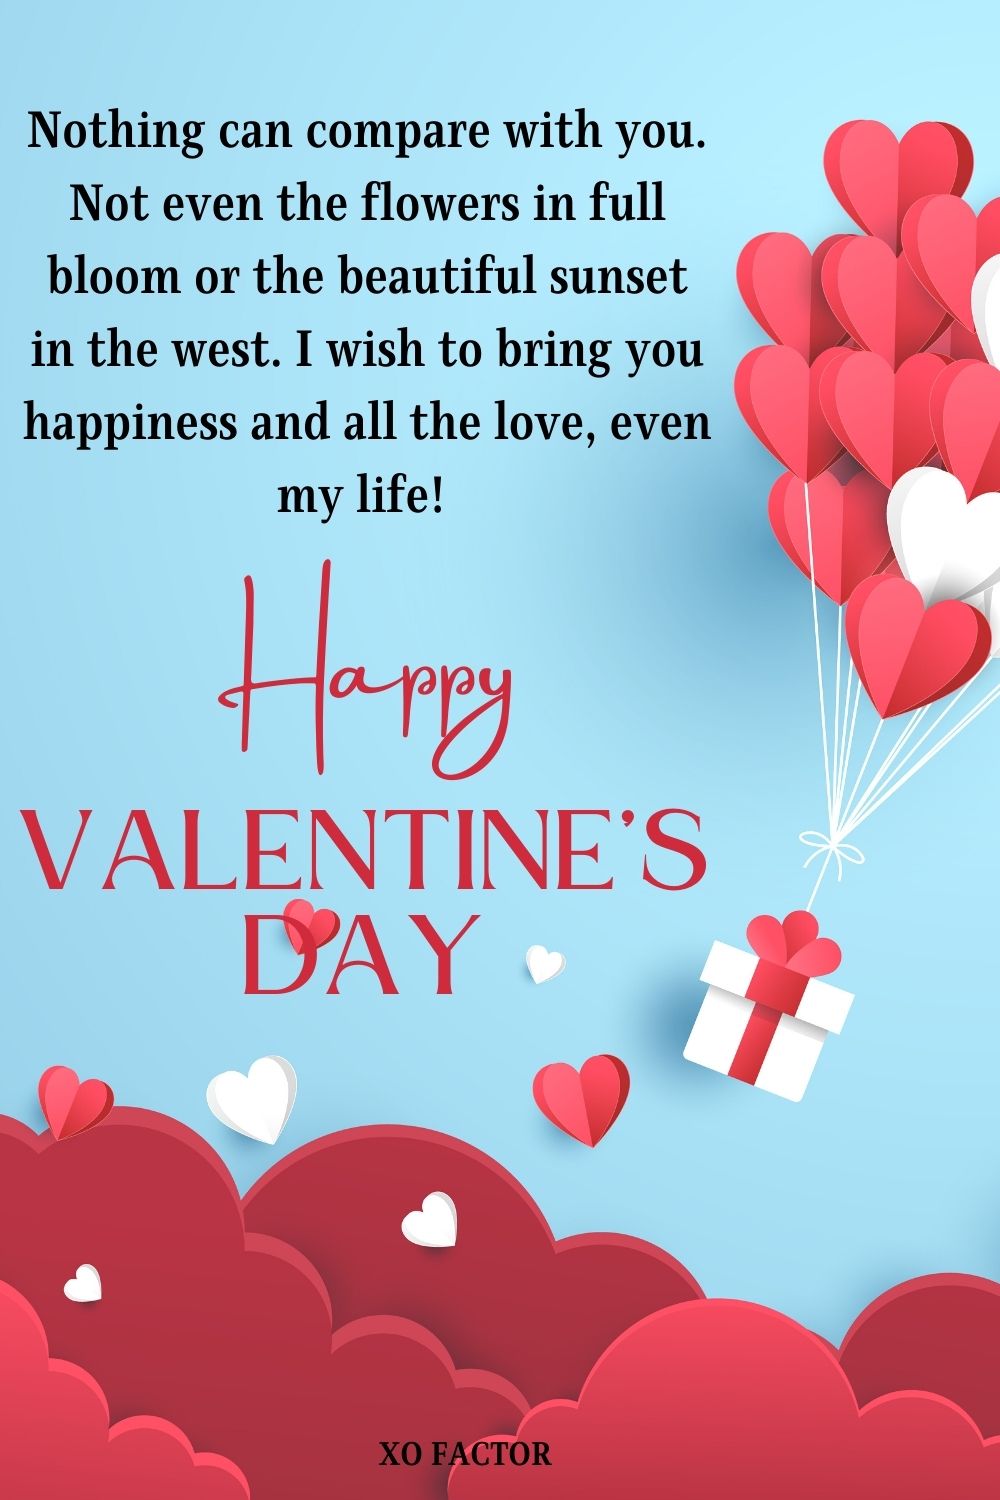 Nothing can compare with you. Not even the flowers in full bloom or the beautiful sunset in the west. I wish to bring you happiness and all the love, even my life! Happy Valentine’s Day sweetheart!